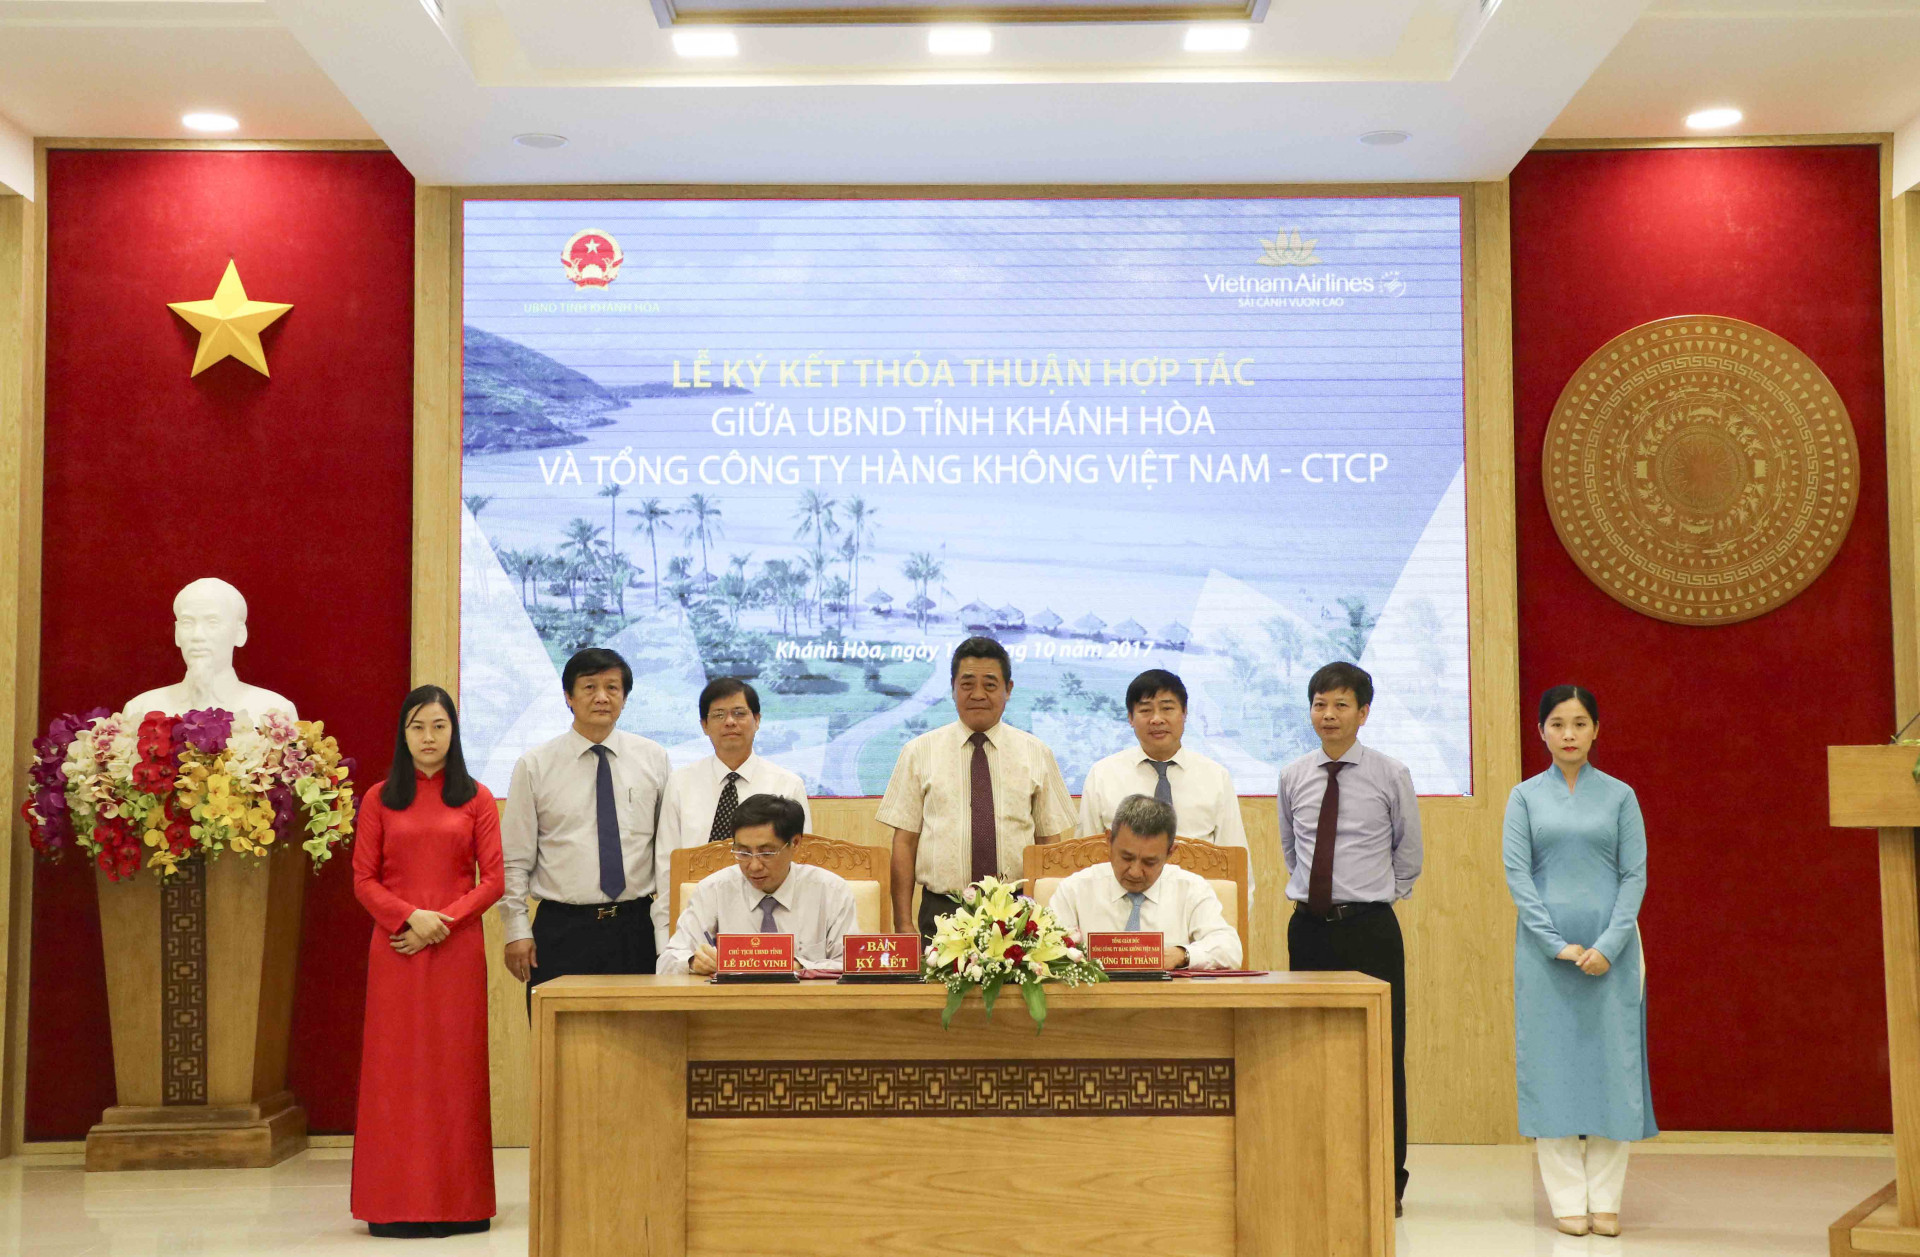 Signing ceremony between Peoples Committe of Khanh Hoa Province and Vietnam Airlines